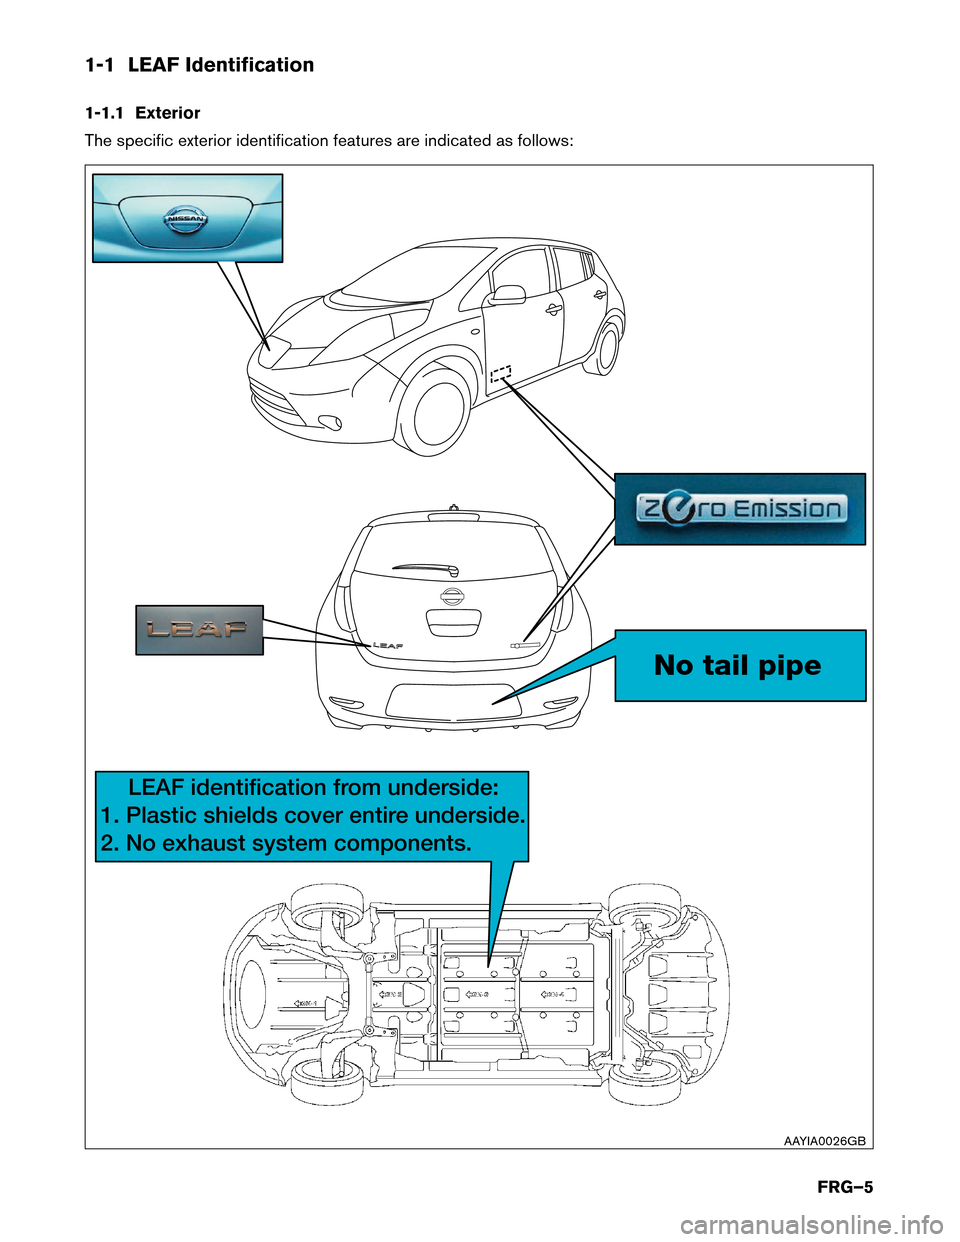 NISSAN LEAF 2015 1.G First Responders Guide 1-1 LEAF Identification
1-1.1
Exterior
The specific exterior identification features are indicated as follows: No tail pipe
LEAF identification from underside:
1. Plastic shields cover entir
 e under